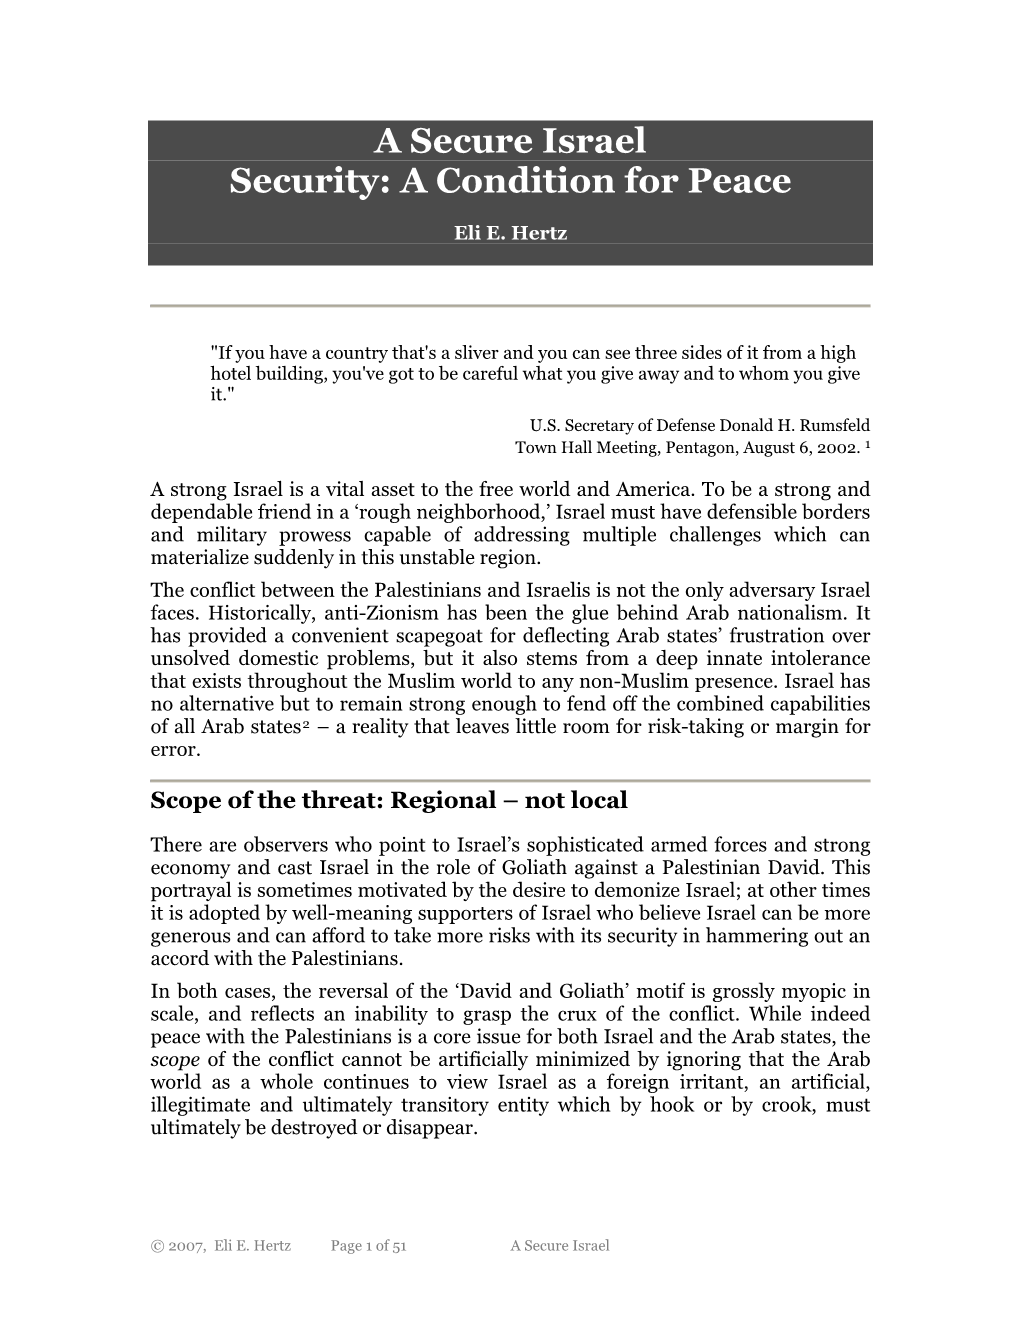 A Secure Israel Security: a Condition for Peace